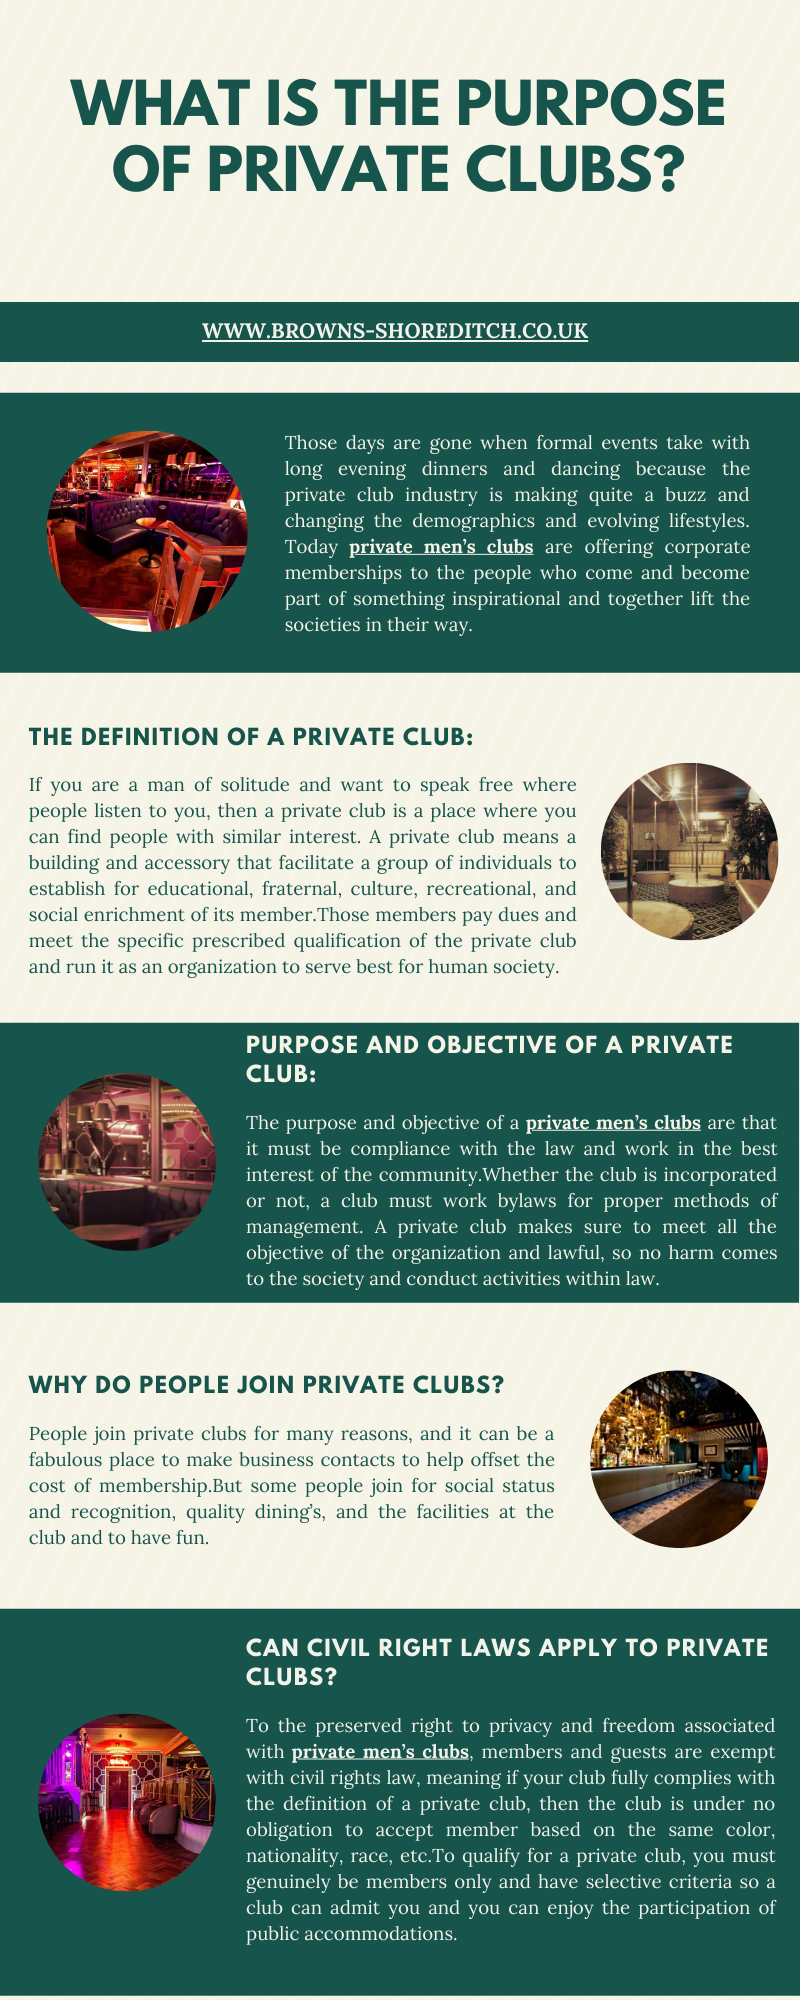 What is the purpose of private clubs?